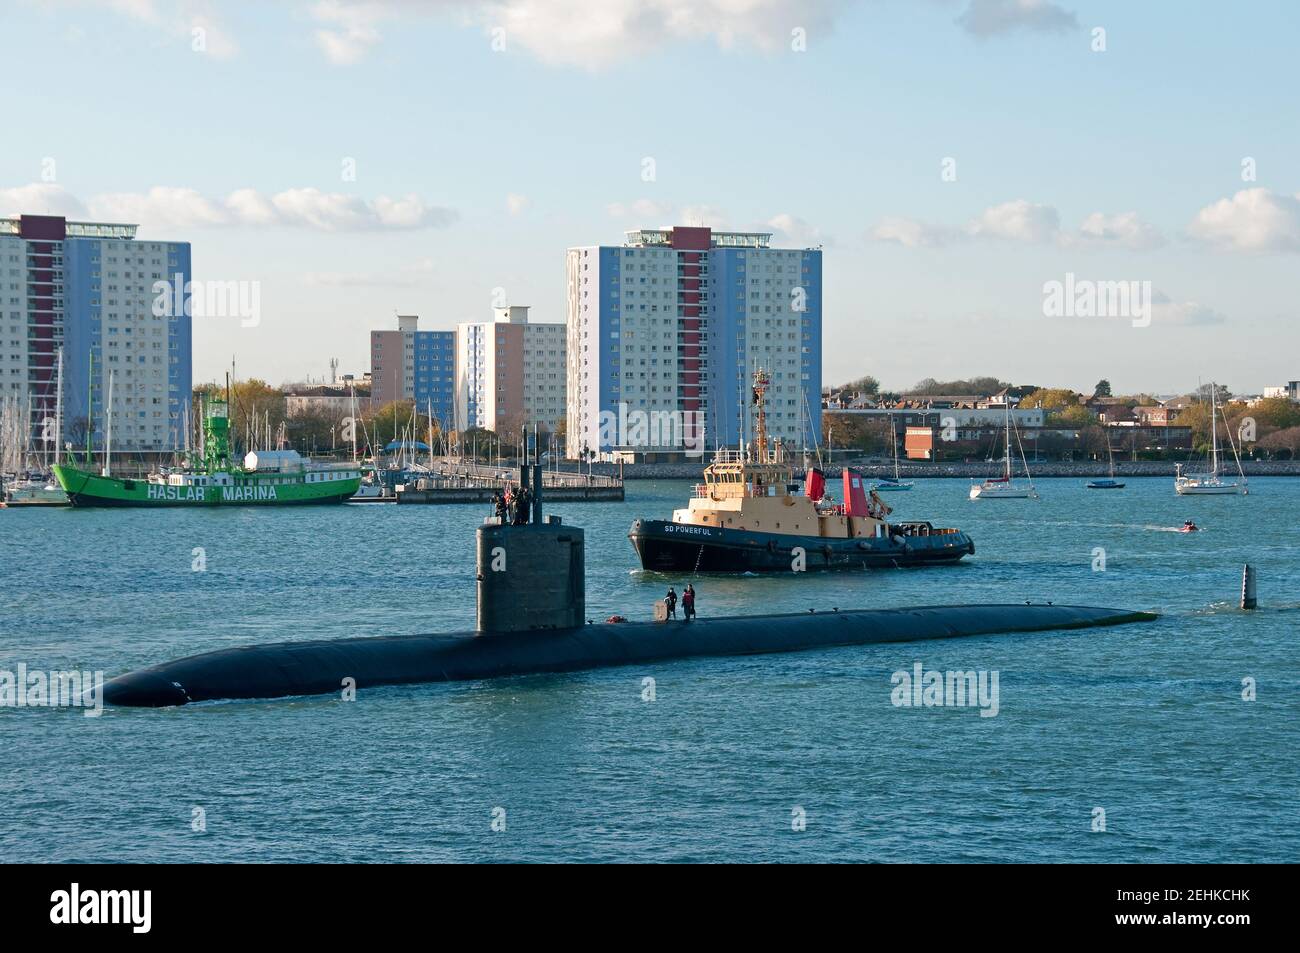 The United States Navy Los Angeles class attack submarine USS Hartford (SSN 768) leaving Portsmouth, UK on 5/11/12 after a courtesy port visit. Stock Photo